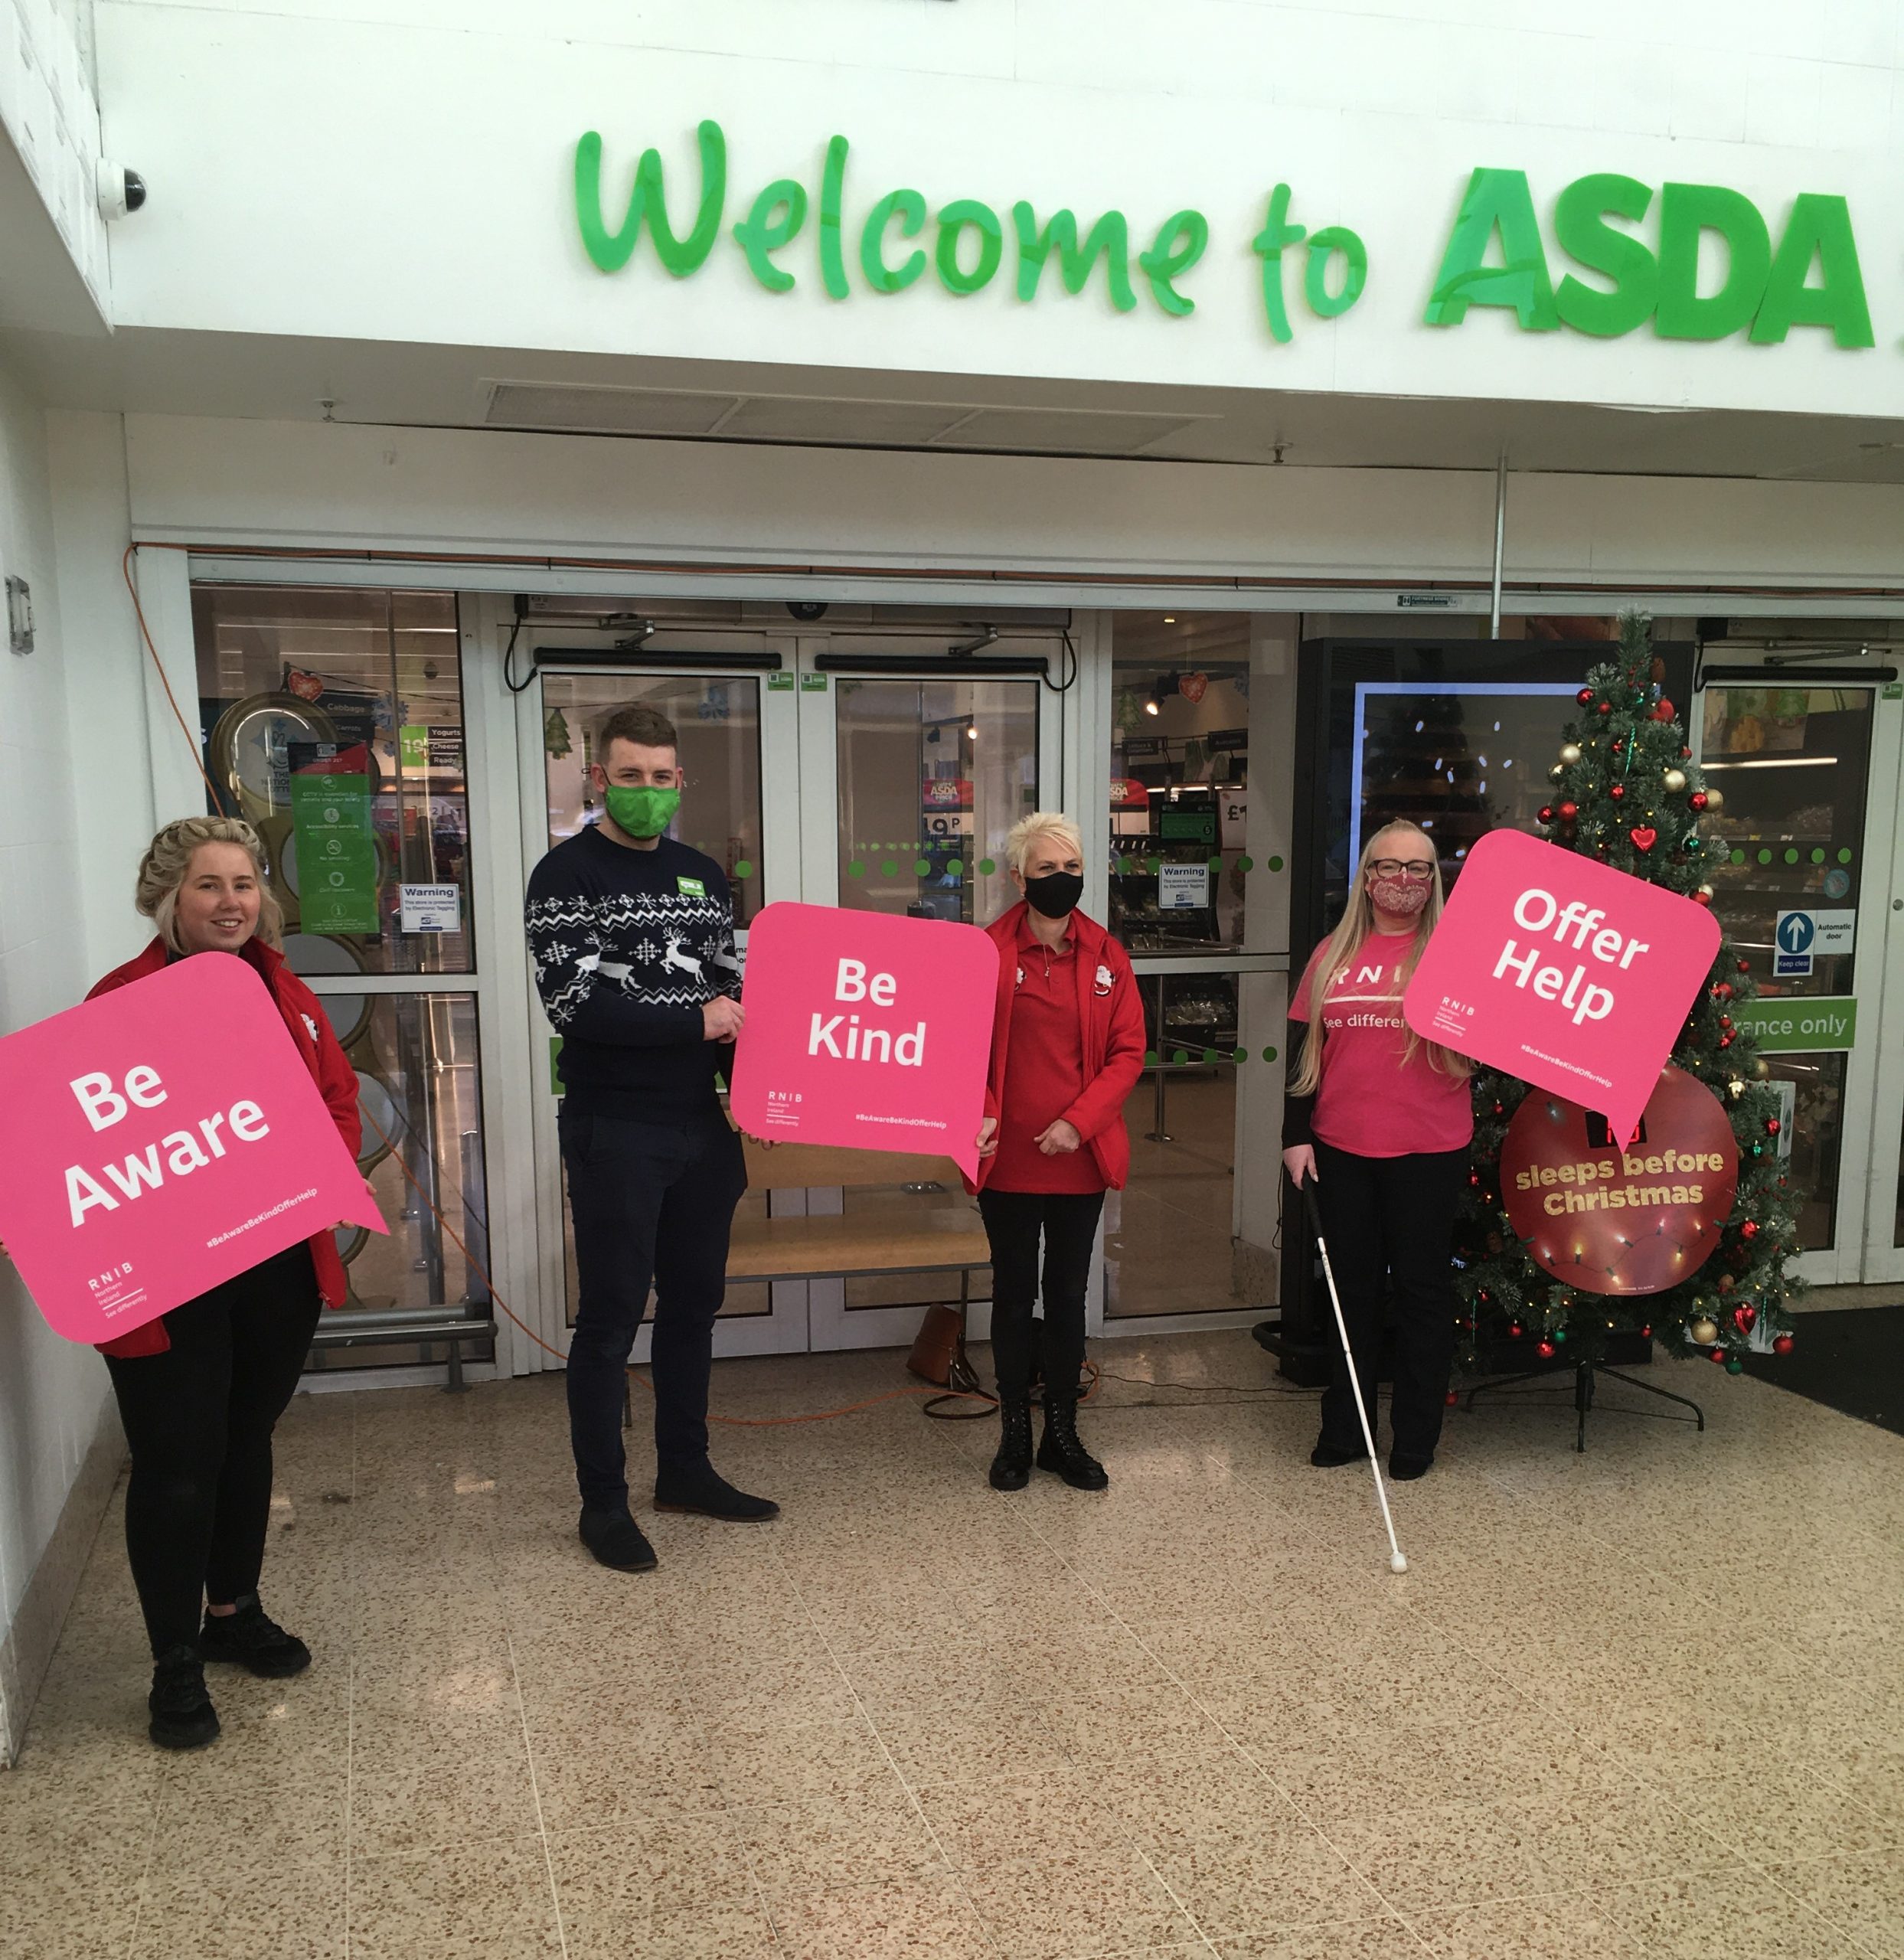 Asda Pledges Support to Customers with Sight Loss